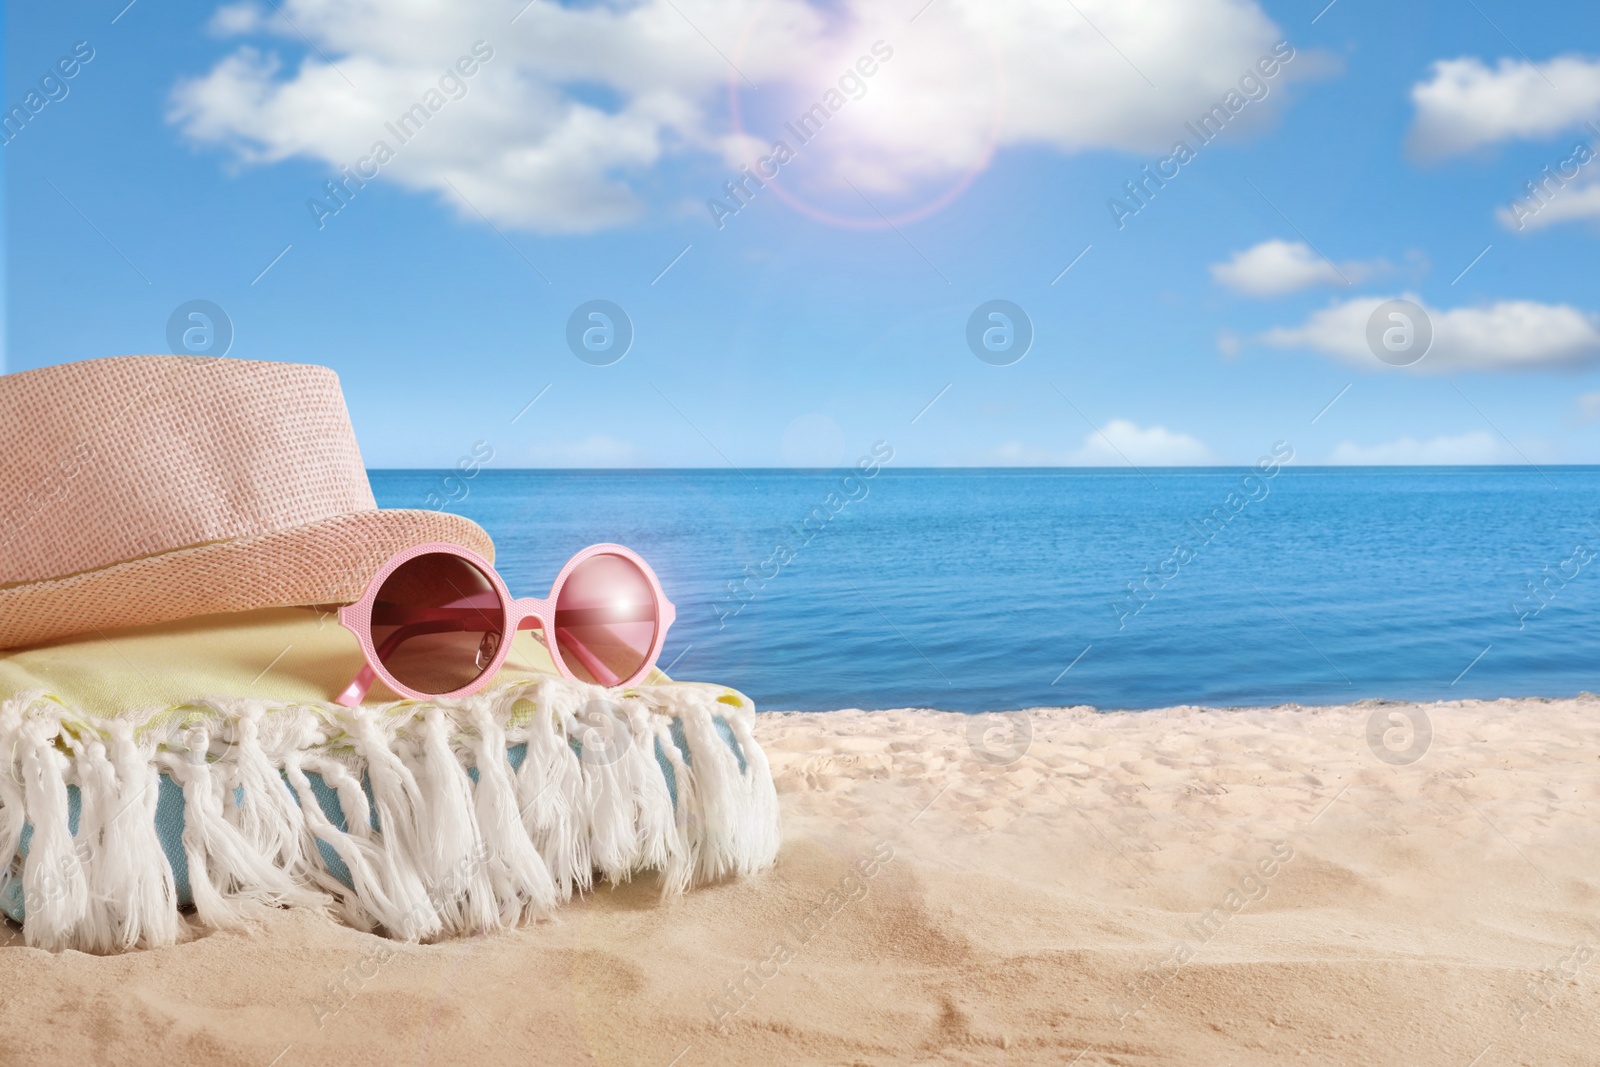 Image of Beach objects on sand near sea, space for text. Summer vacation 